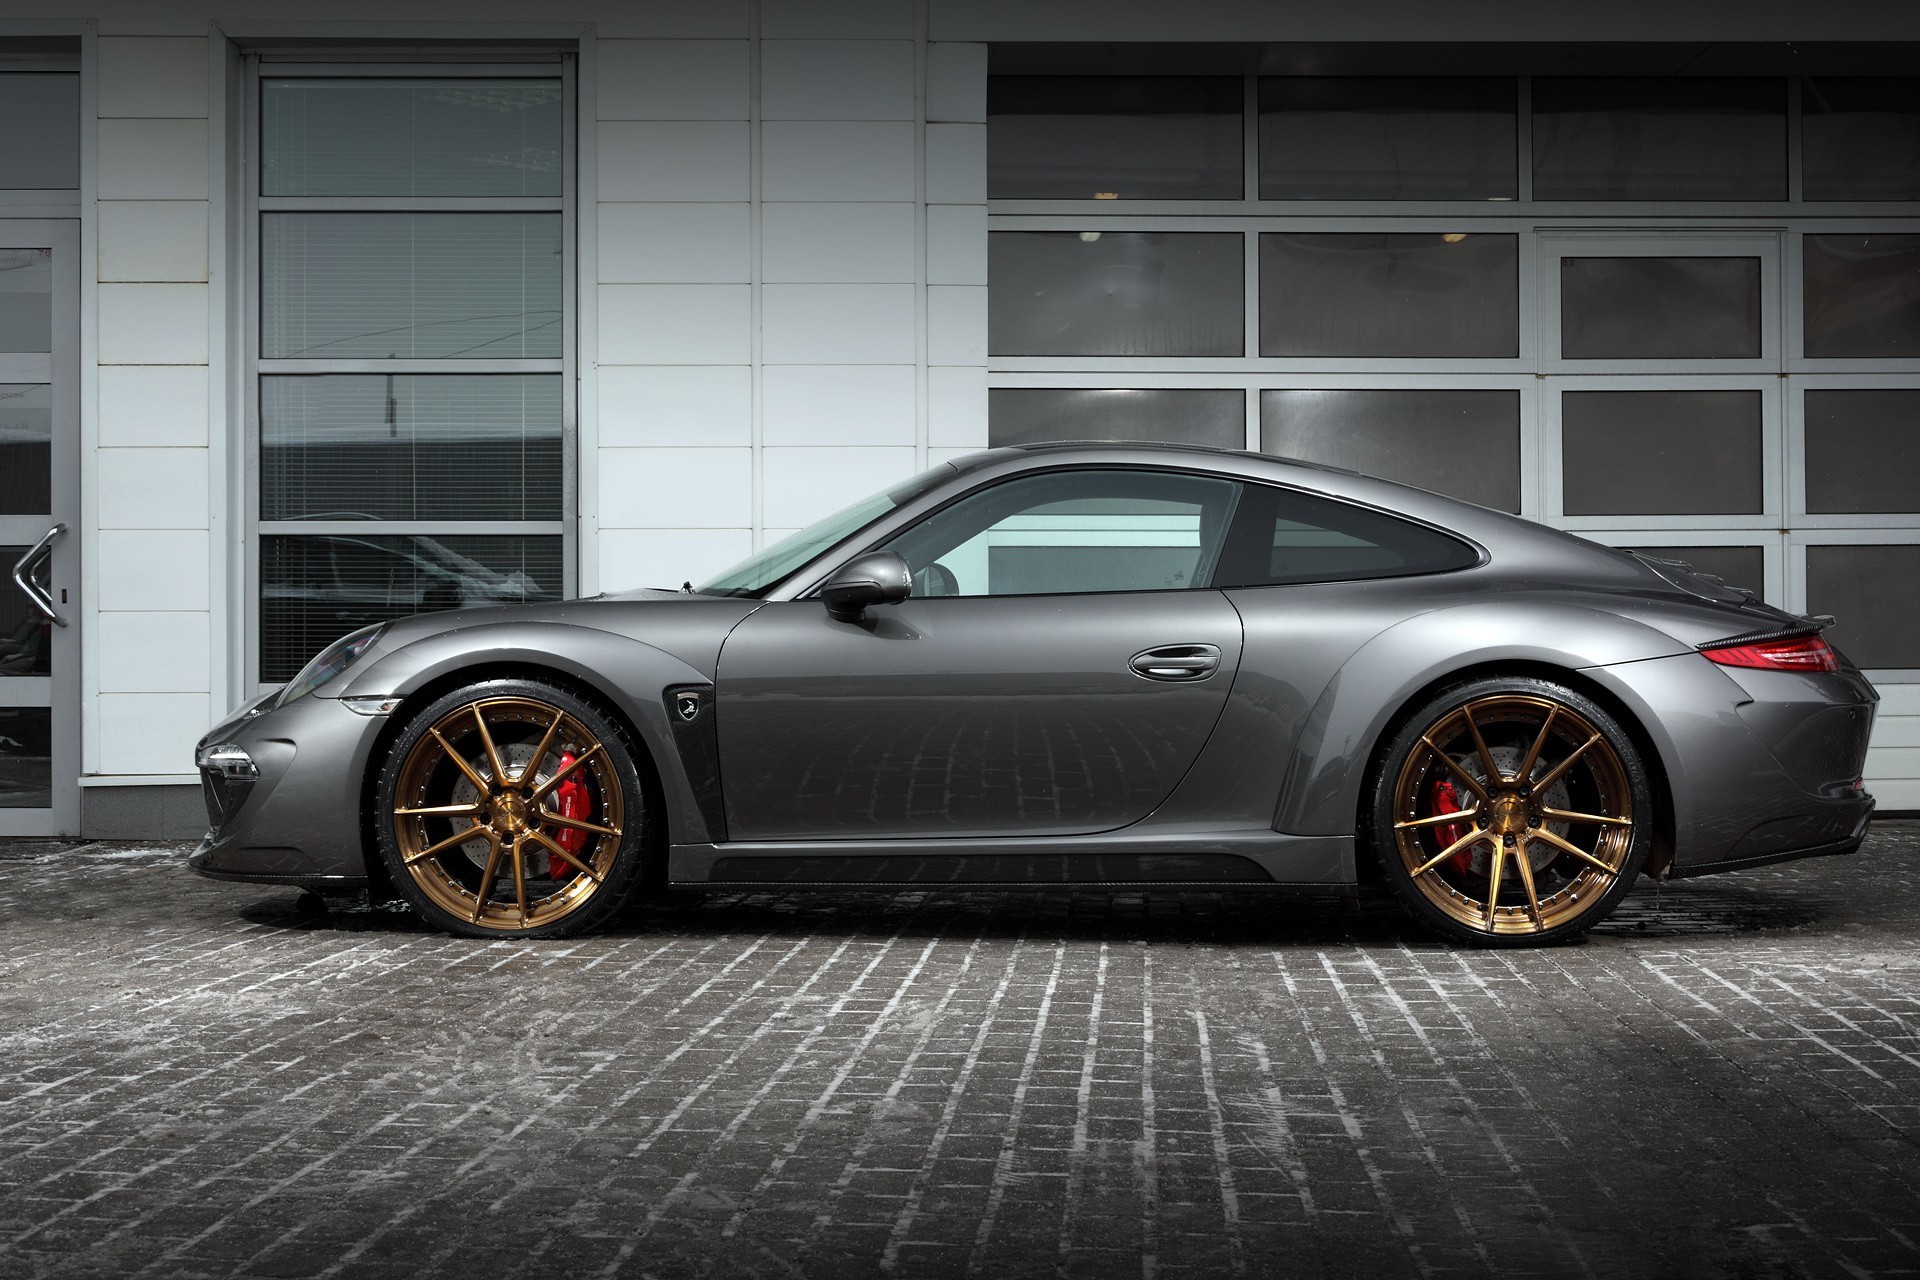 Check our price and buy Topcar Design body kit for Porsche 991 991 Stinger